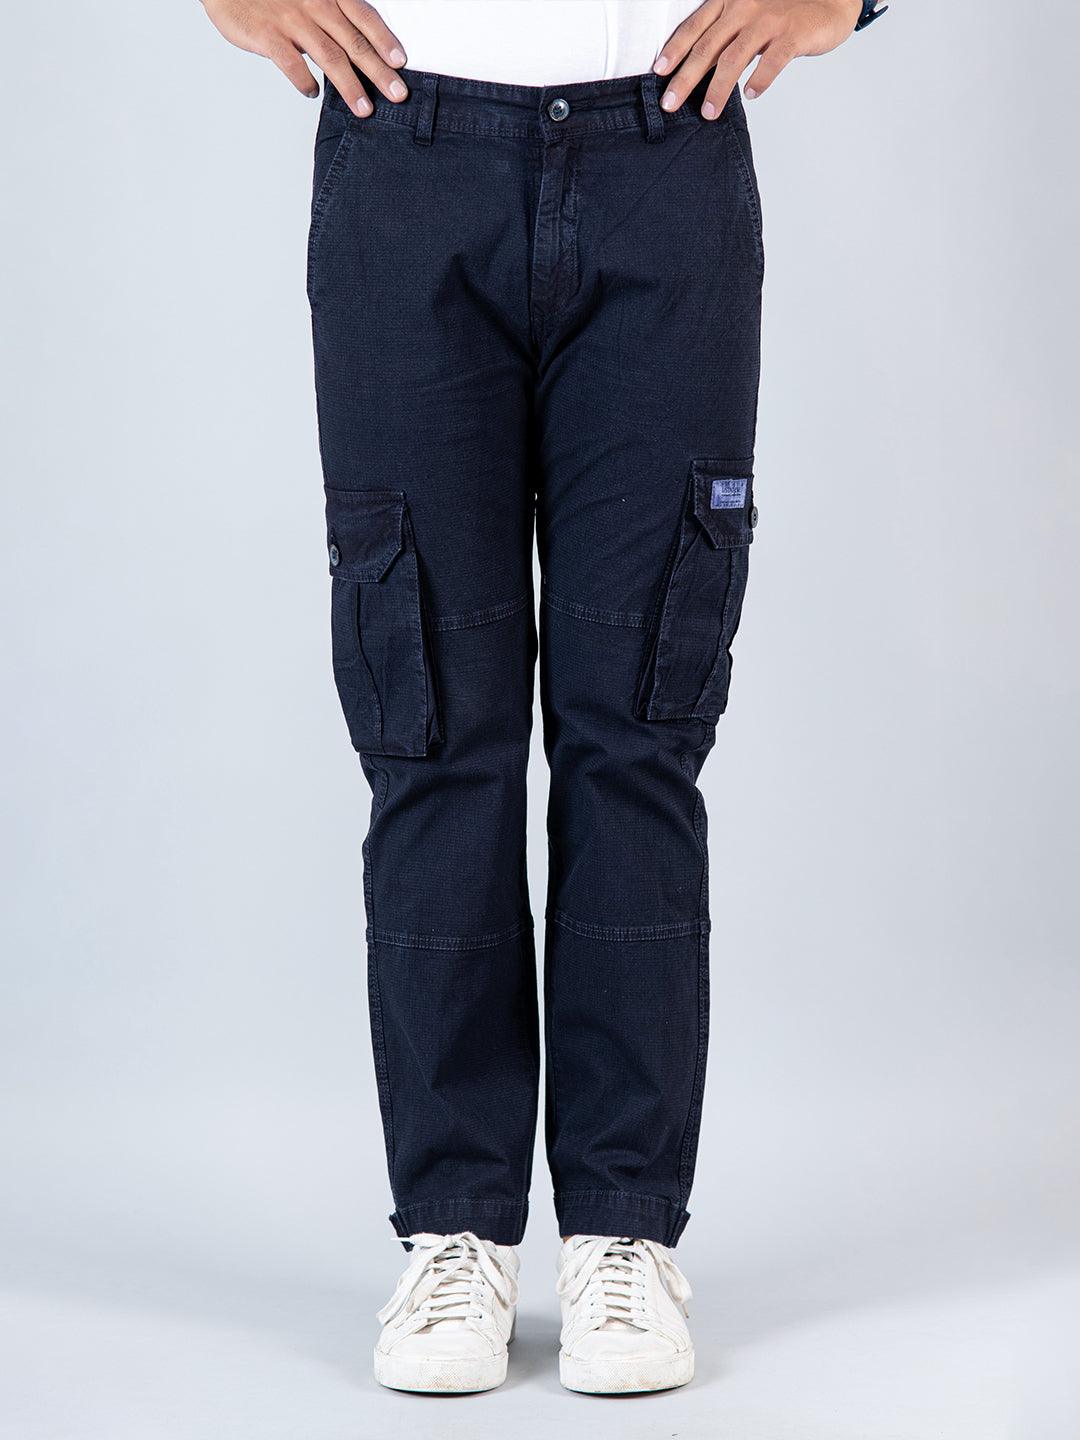 Men's Regular Fit Cargo Pants by Stone Island | Coltorti Boutique